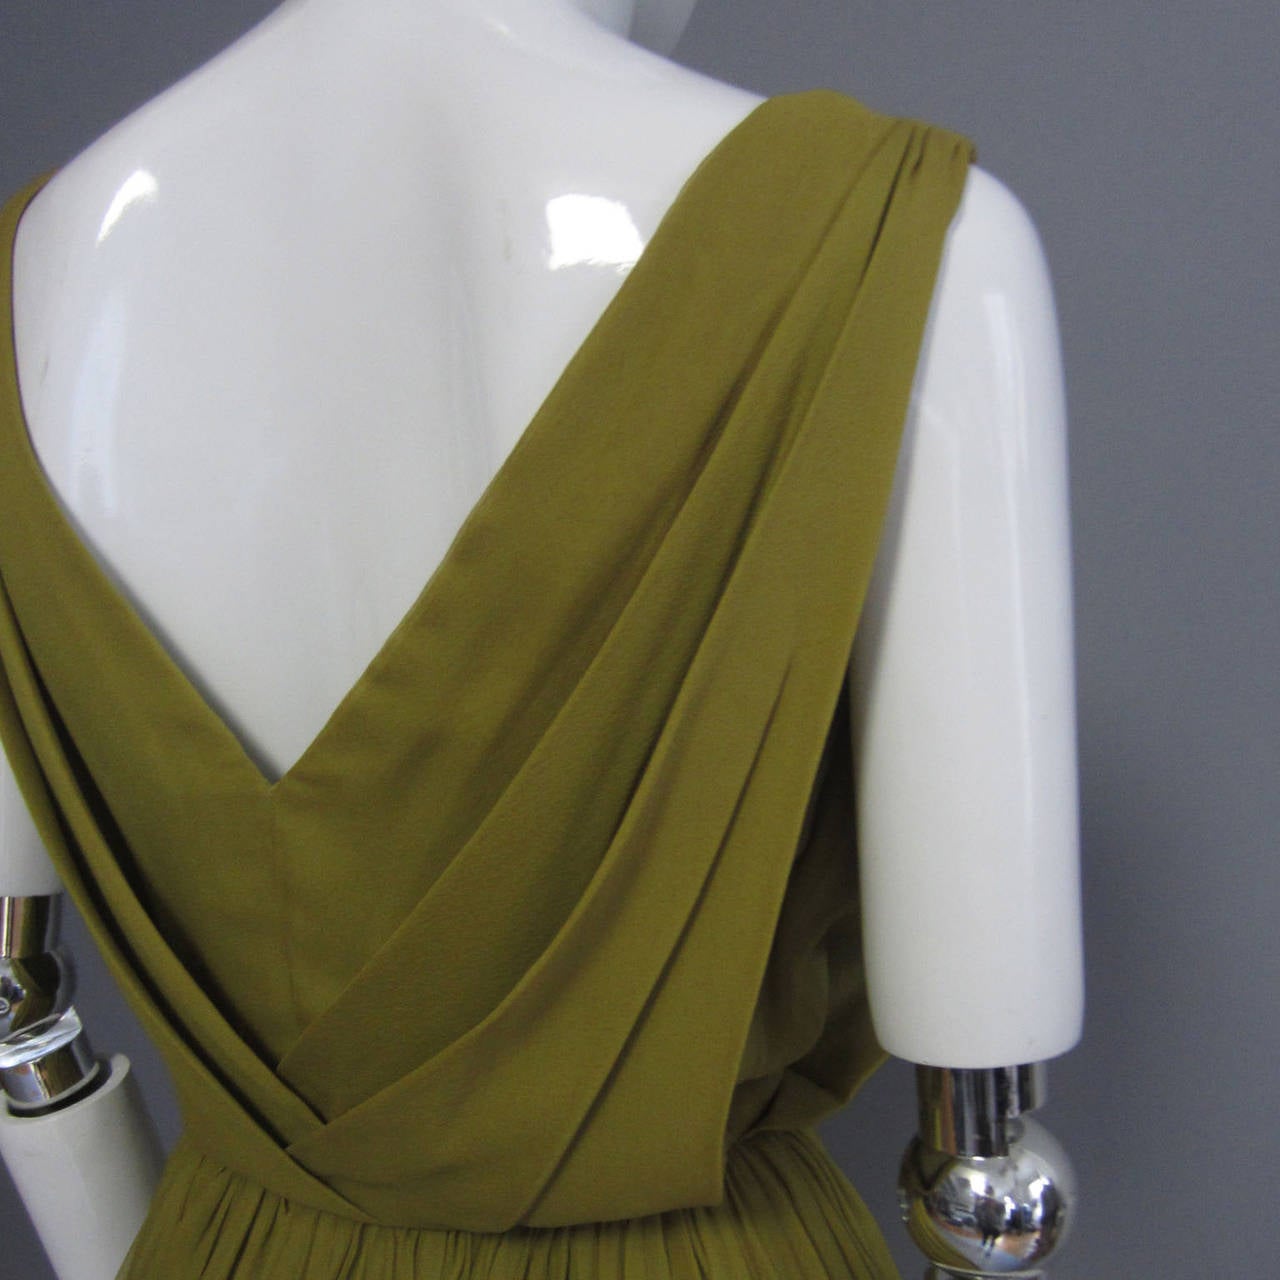 This dress showcases the beautiful and delicate uses of chiffon. The skirt is made up of various layers of olive green chiffon; the layers add volume and the small pleats create a visual texture. The top features draping at the neck. This is